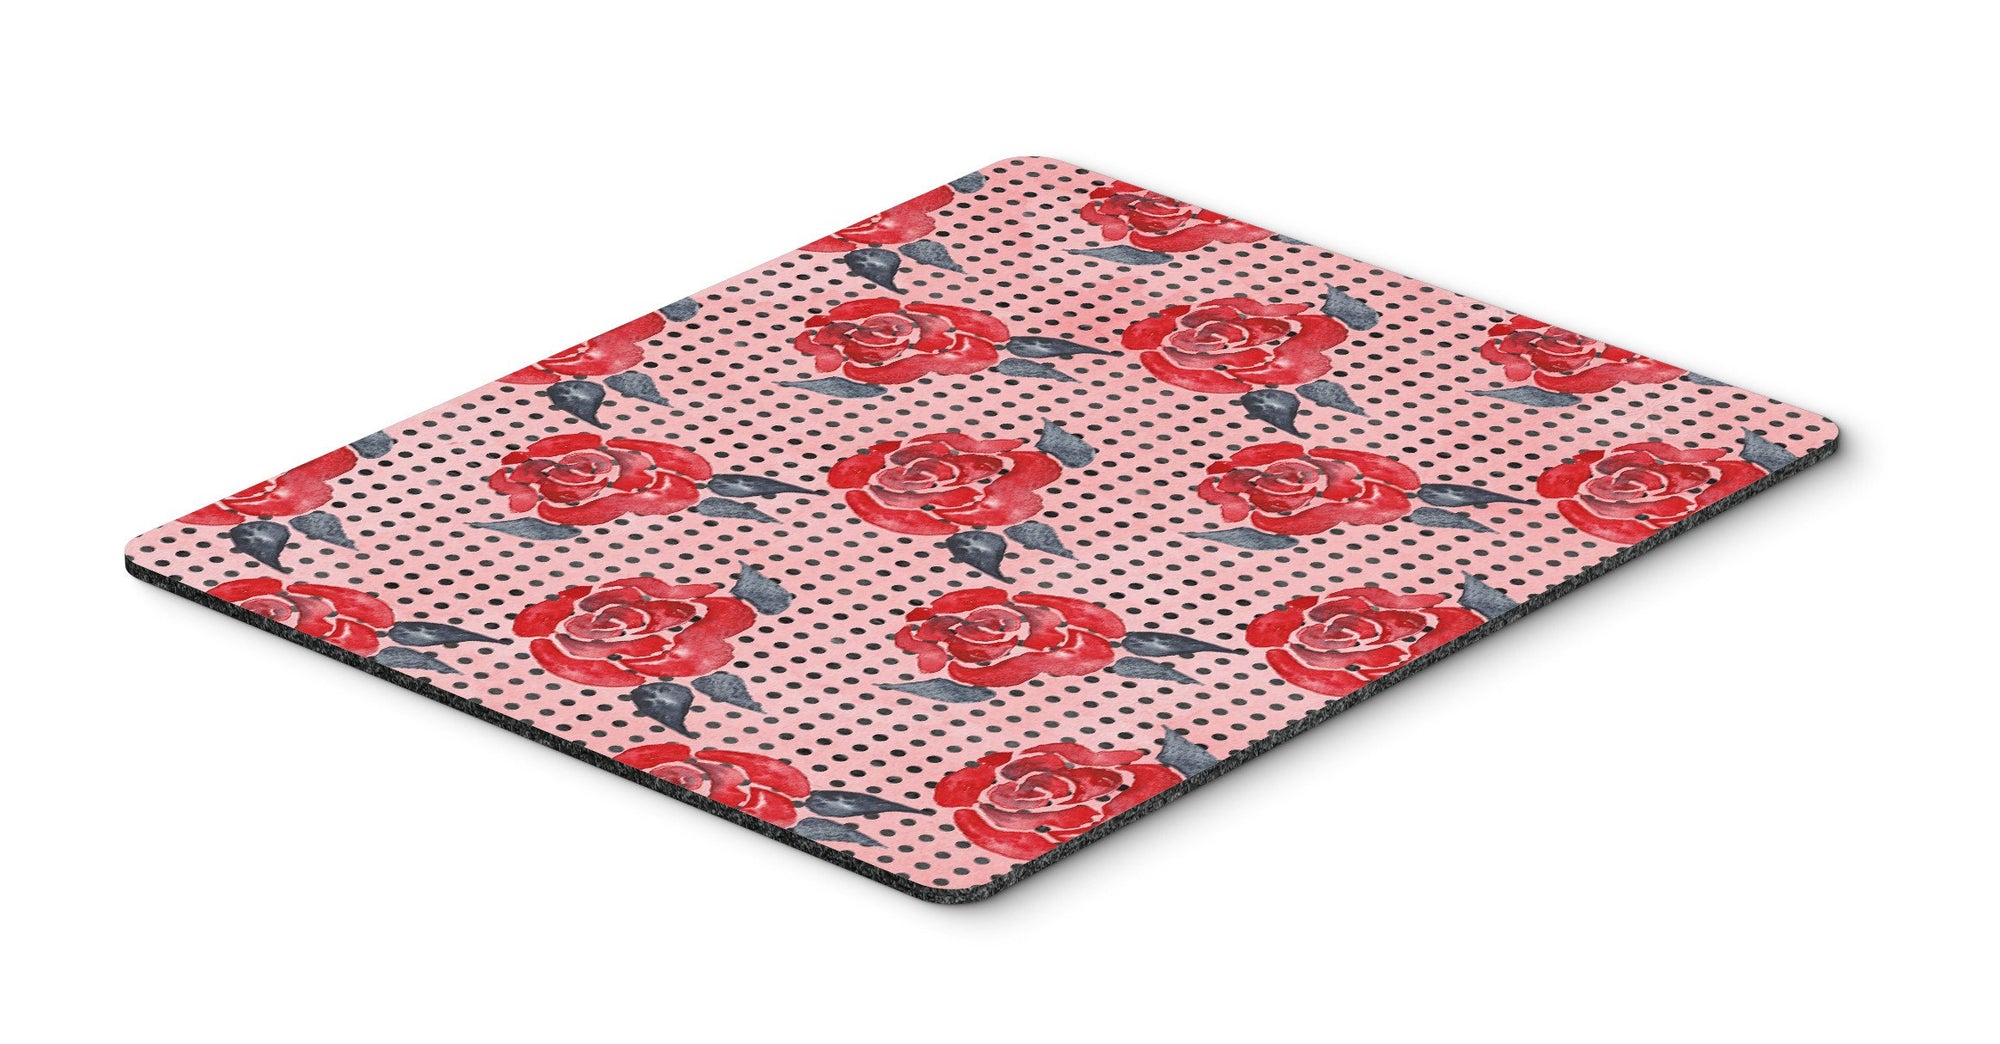 Watercolor Red Roses and Polkadots Mouse Pad, Hot Pad or Trivet BB7513MP by Caroline's Treasures